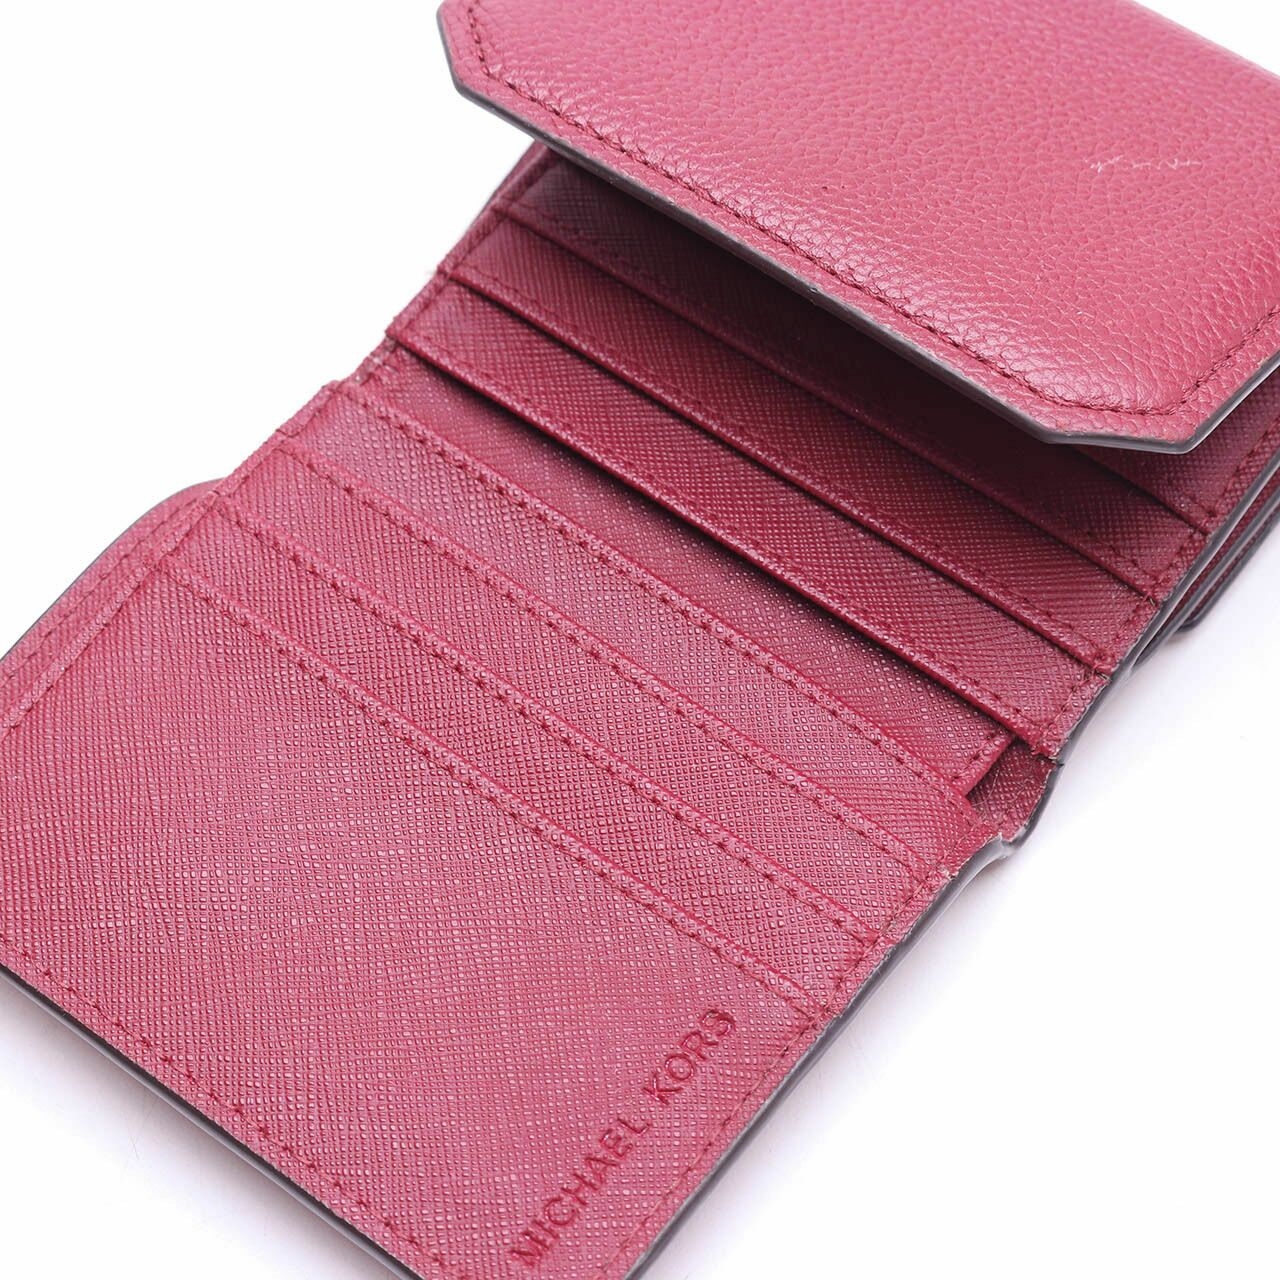 Michael Kors Burgundy Hayes Leather Medium Trifold Coint Case Wallet